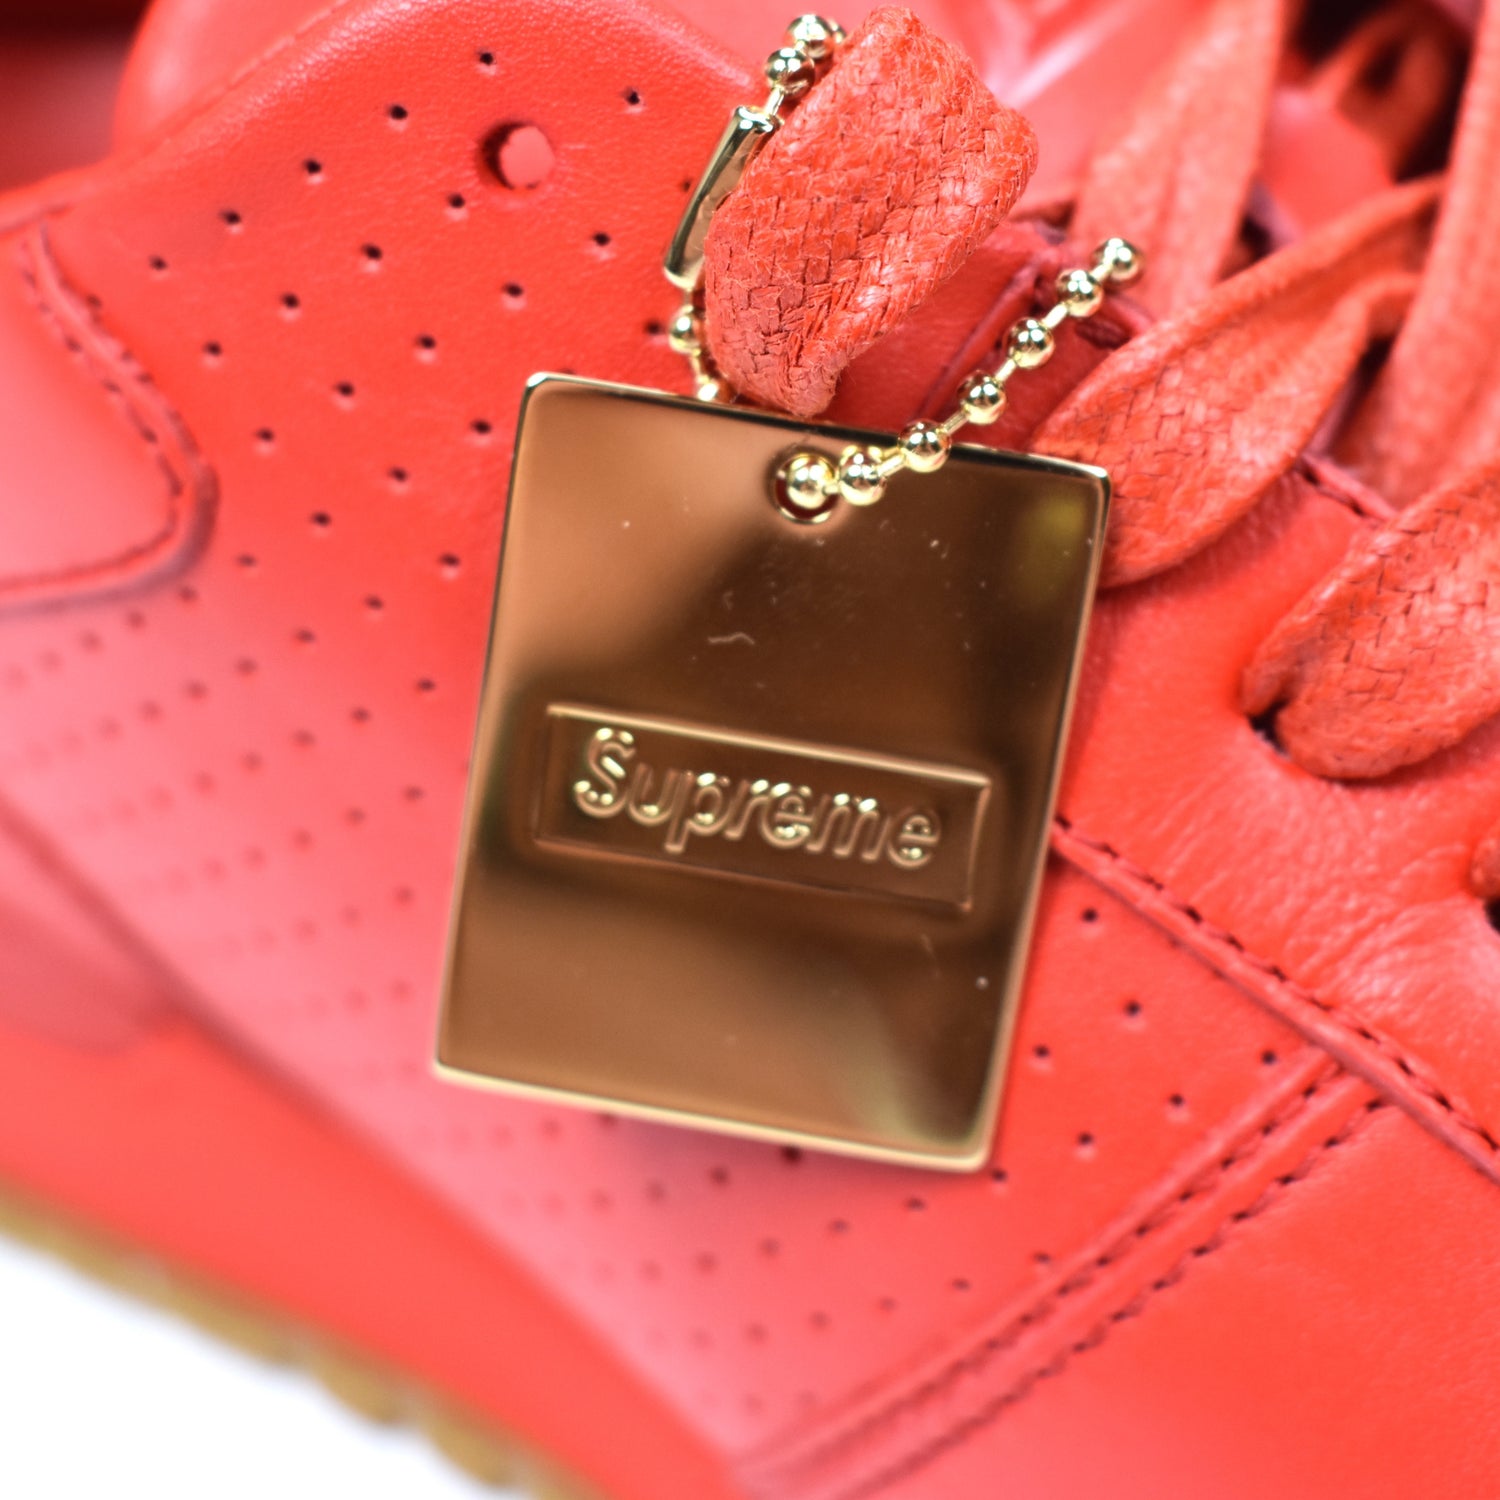 Louis Vuitton X Supreme Run Away Sneaker  Size 11 Available For Immediate  Sale At Sotheby's